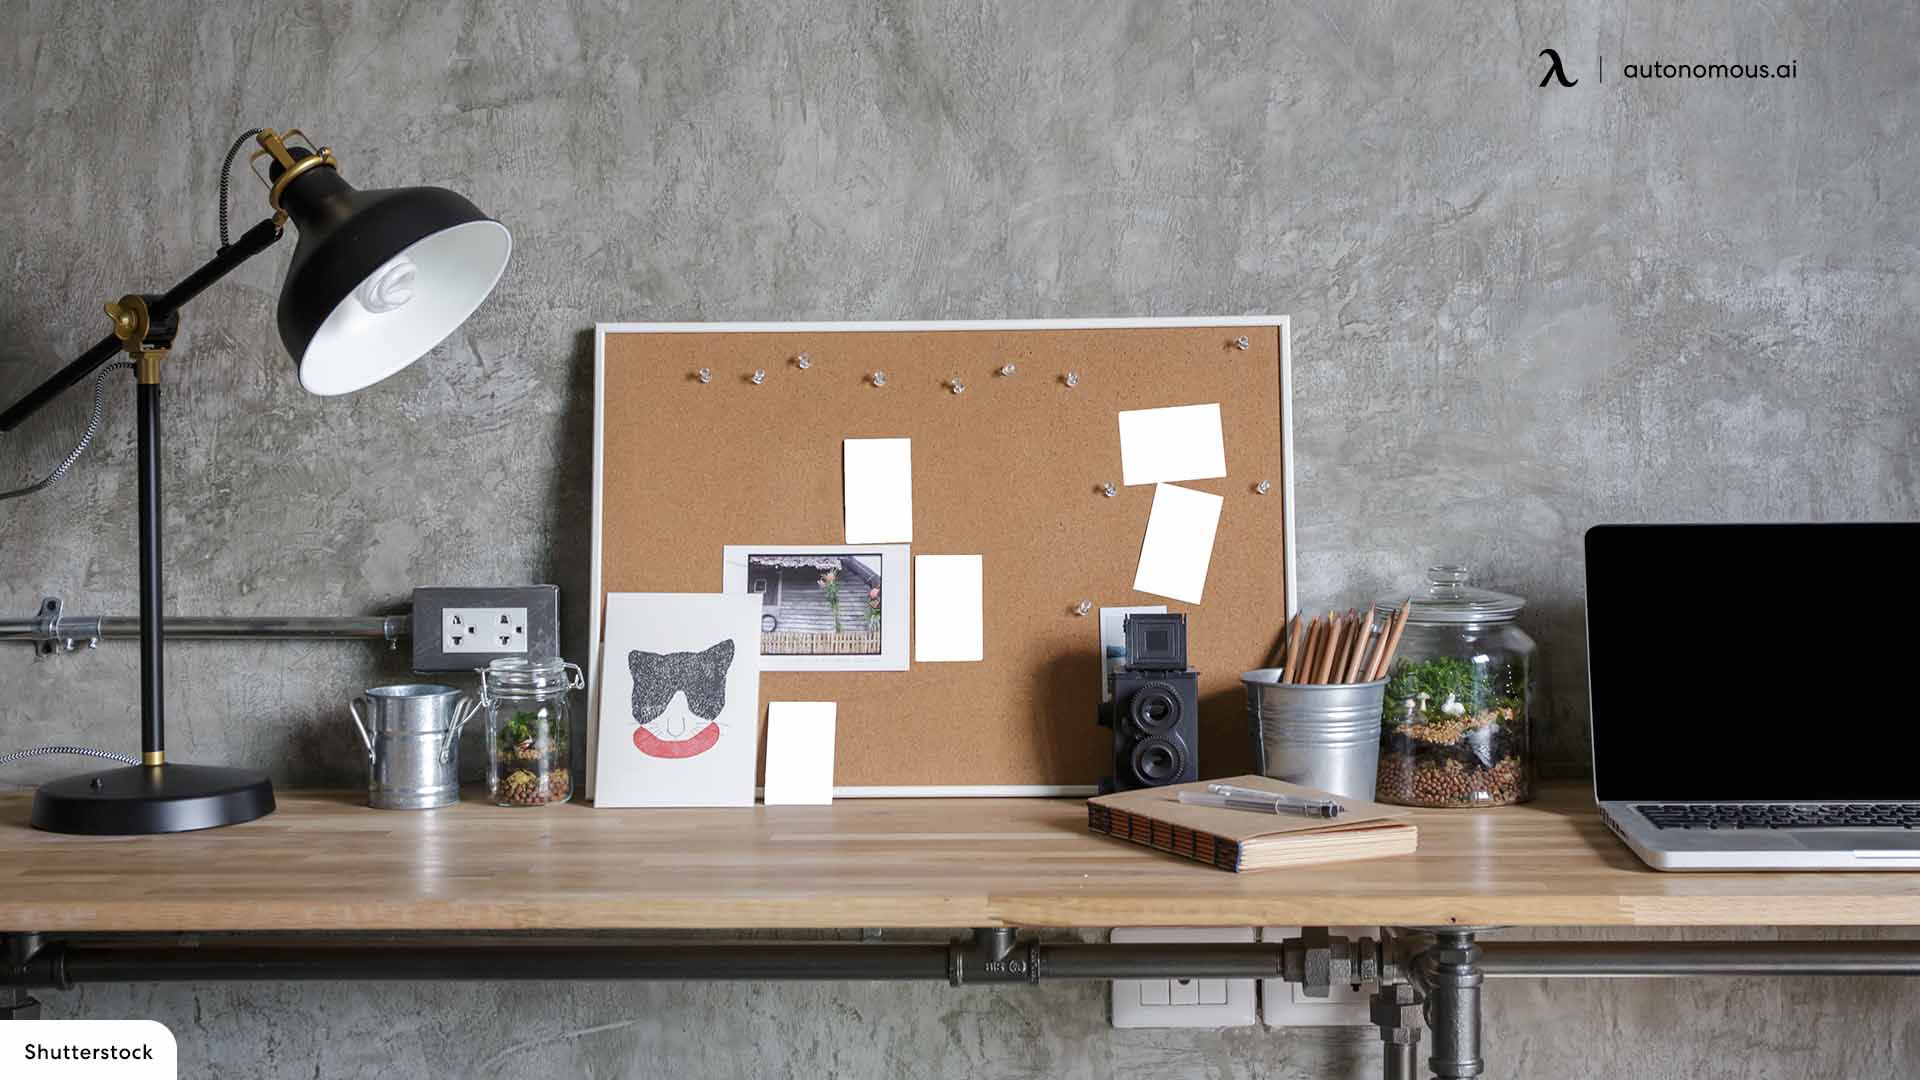 Top 35 Desks for Small Space in 2022 to Buy Right Away